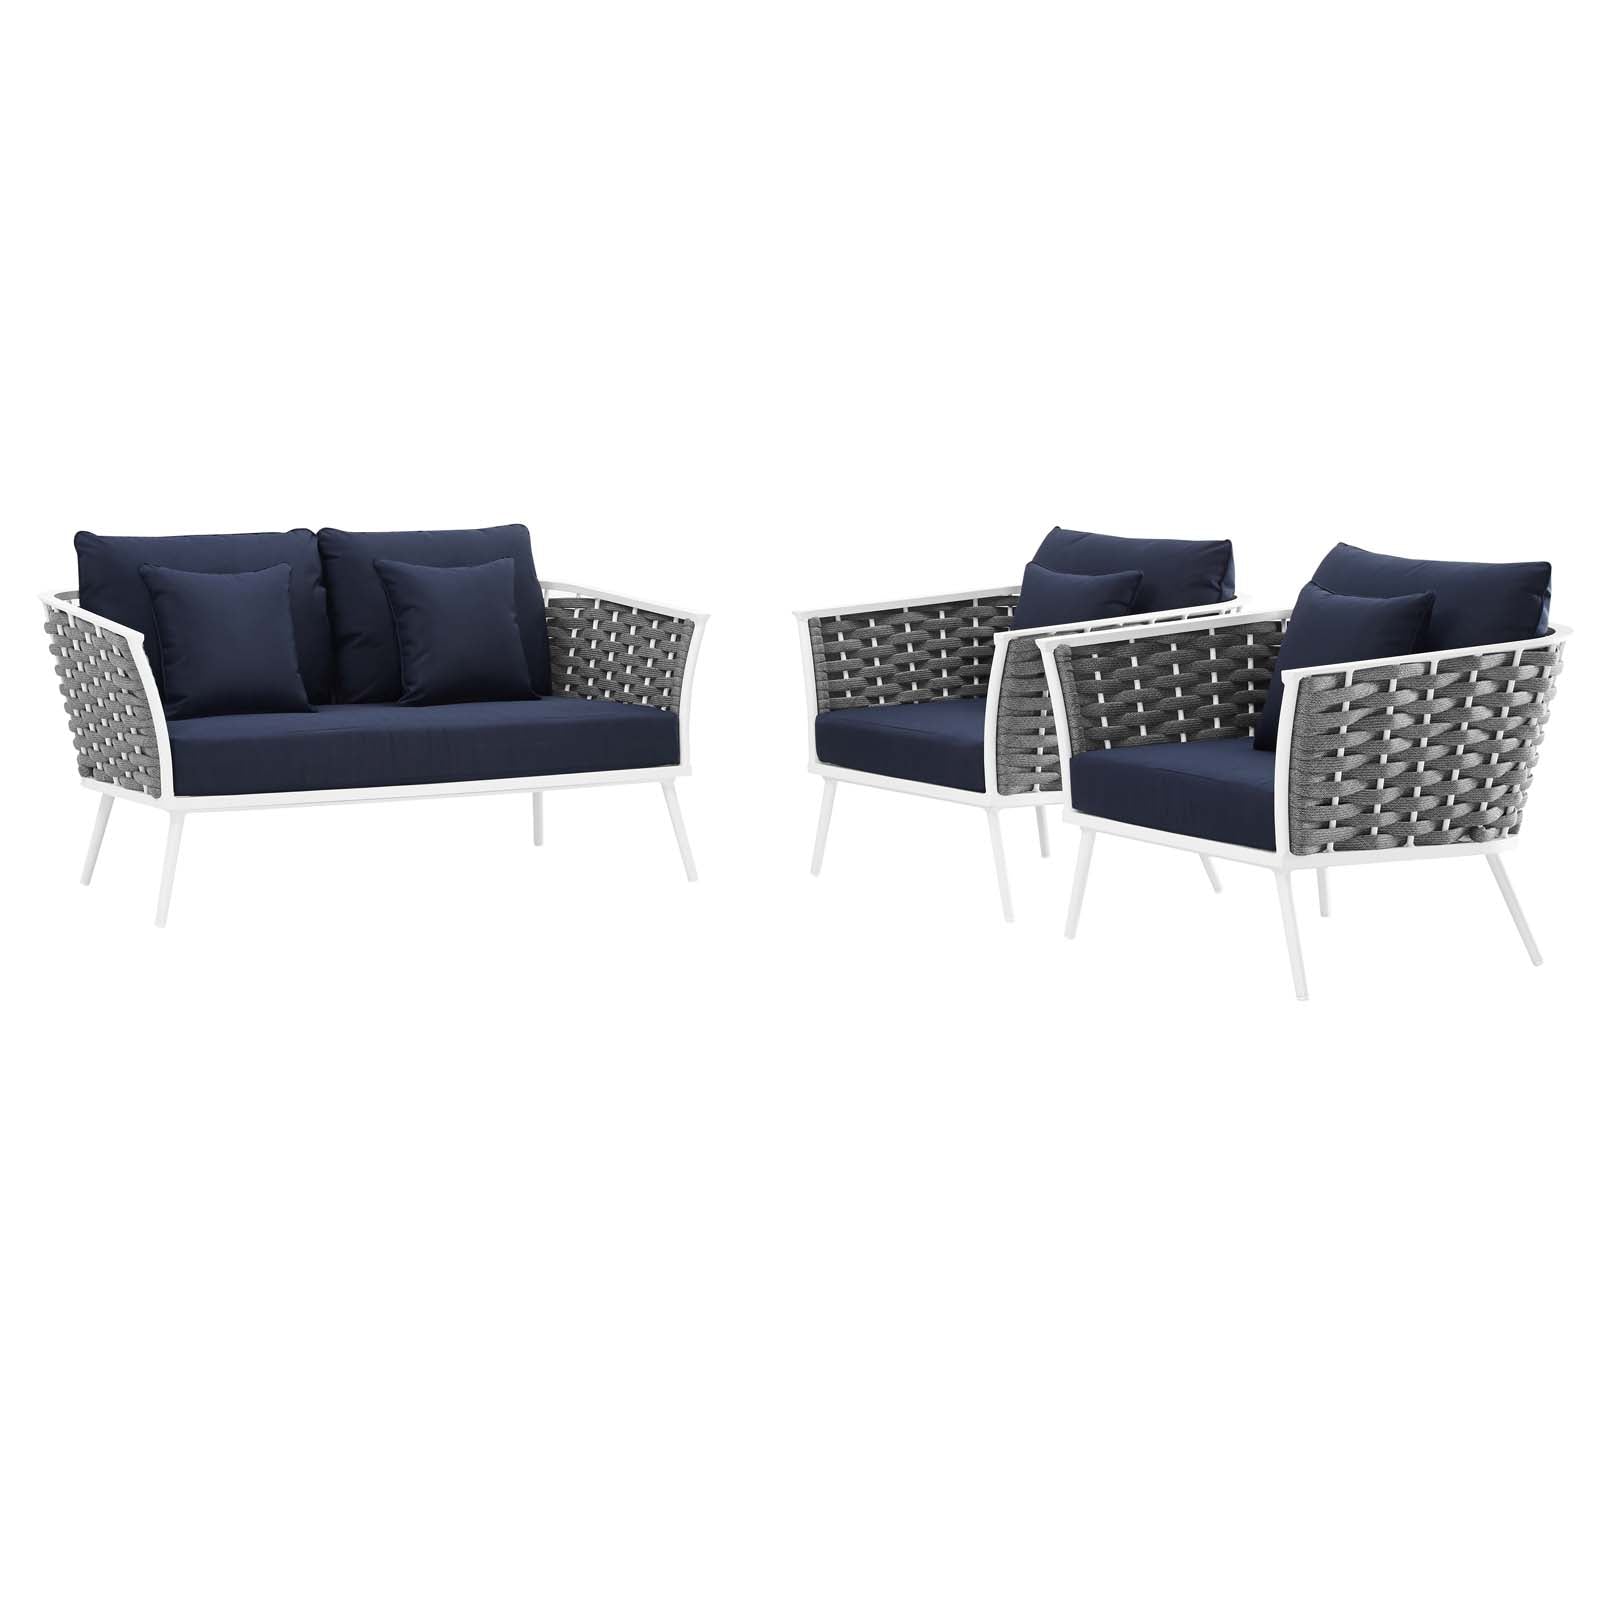 Stance 3 Piece Outdoor Patio Aluminum Sectional Sofa Set - East Shore Modern Home Furnishings